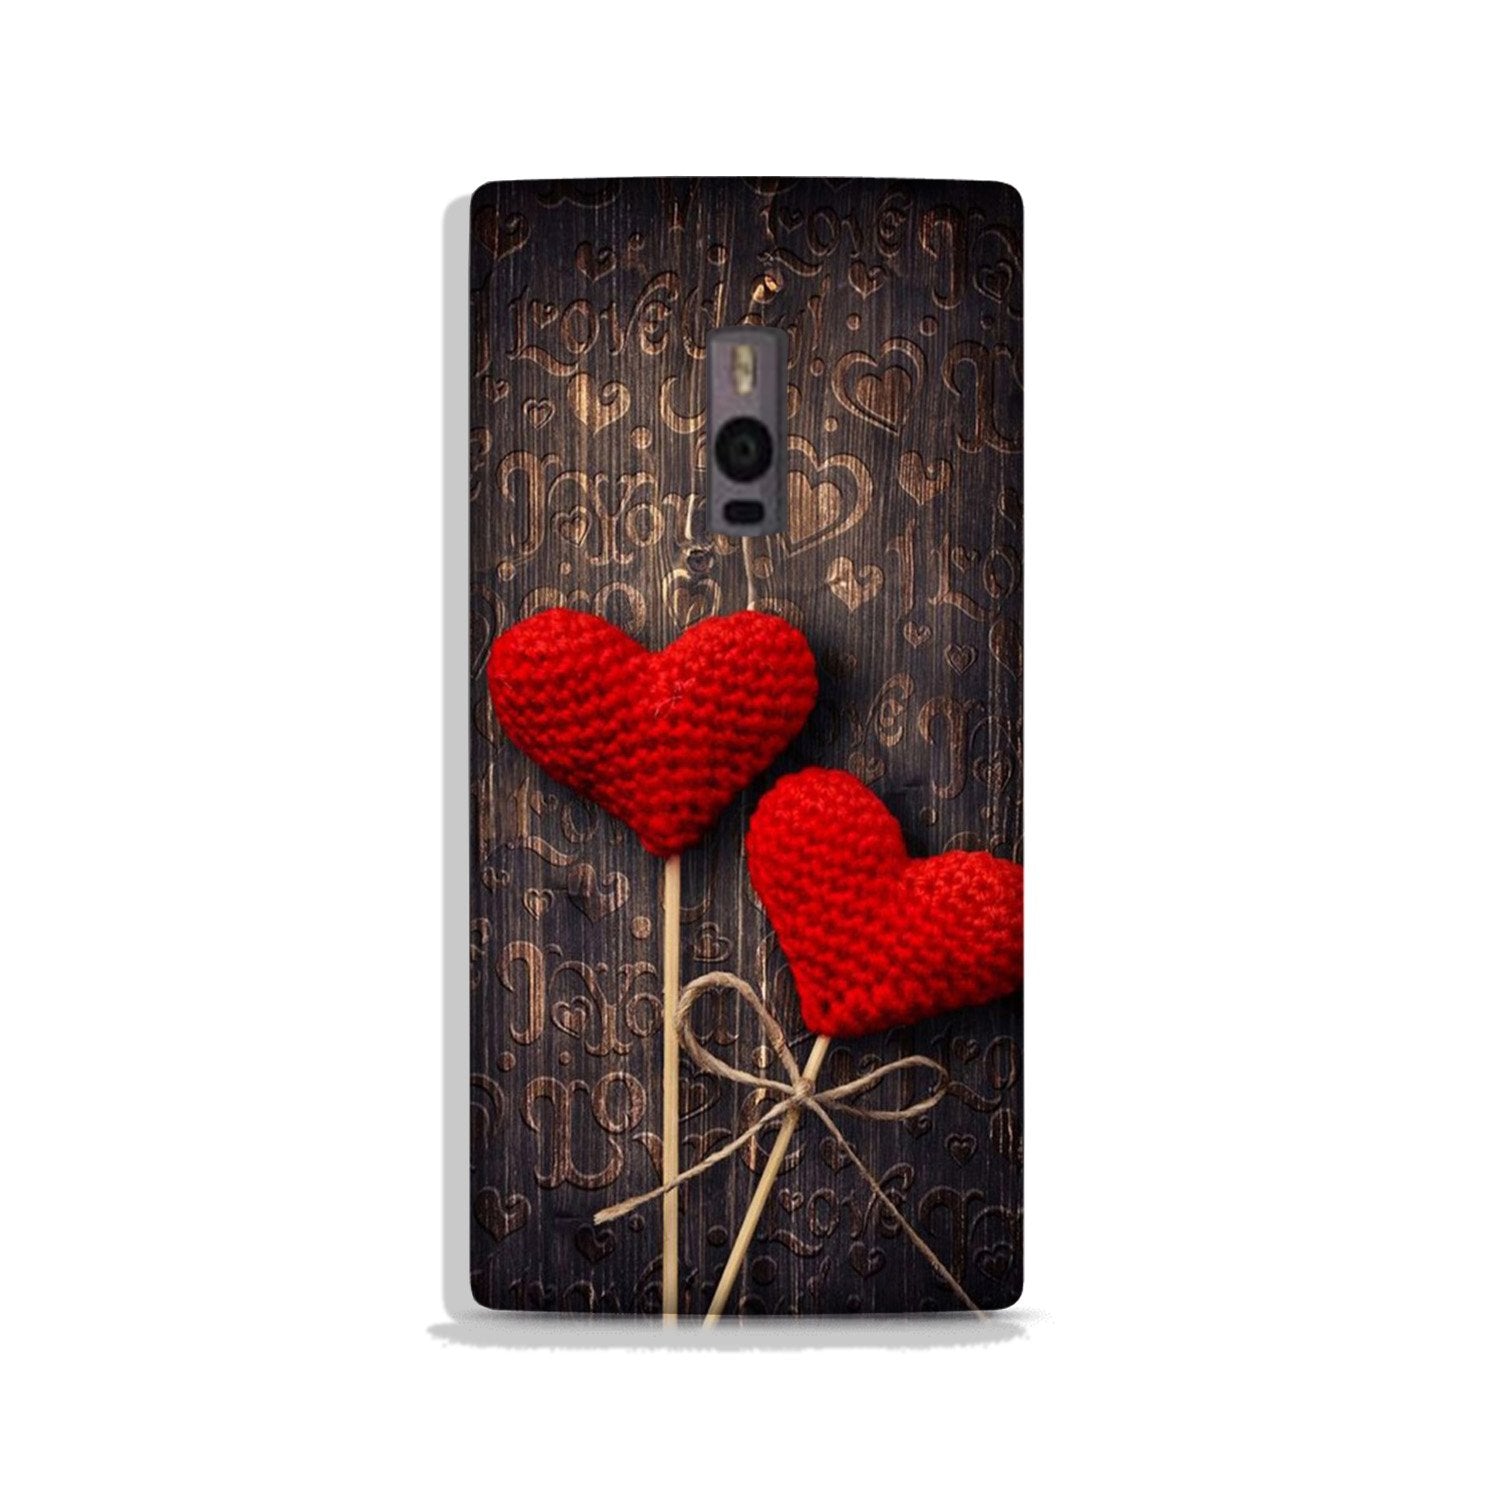 Red Hearts Case for OnePlus 2